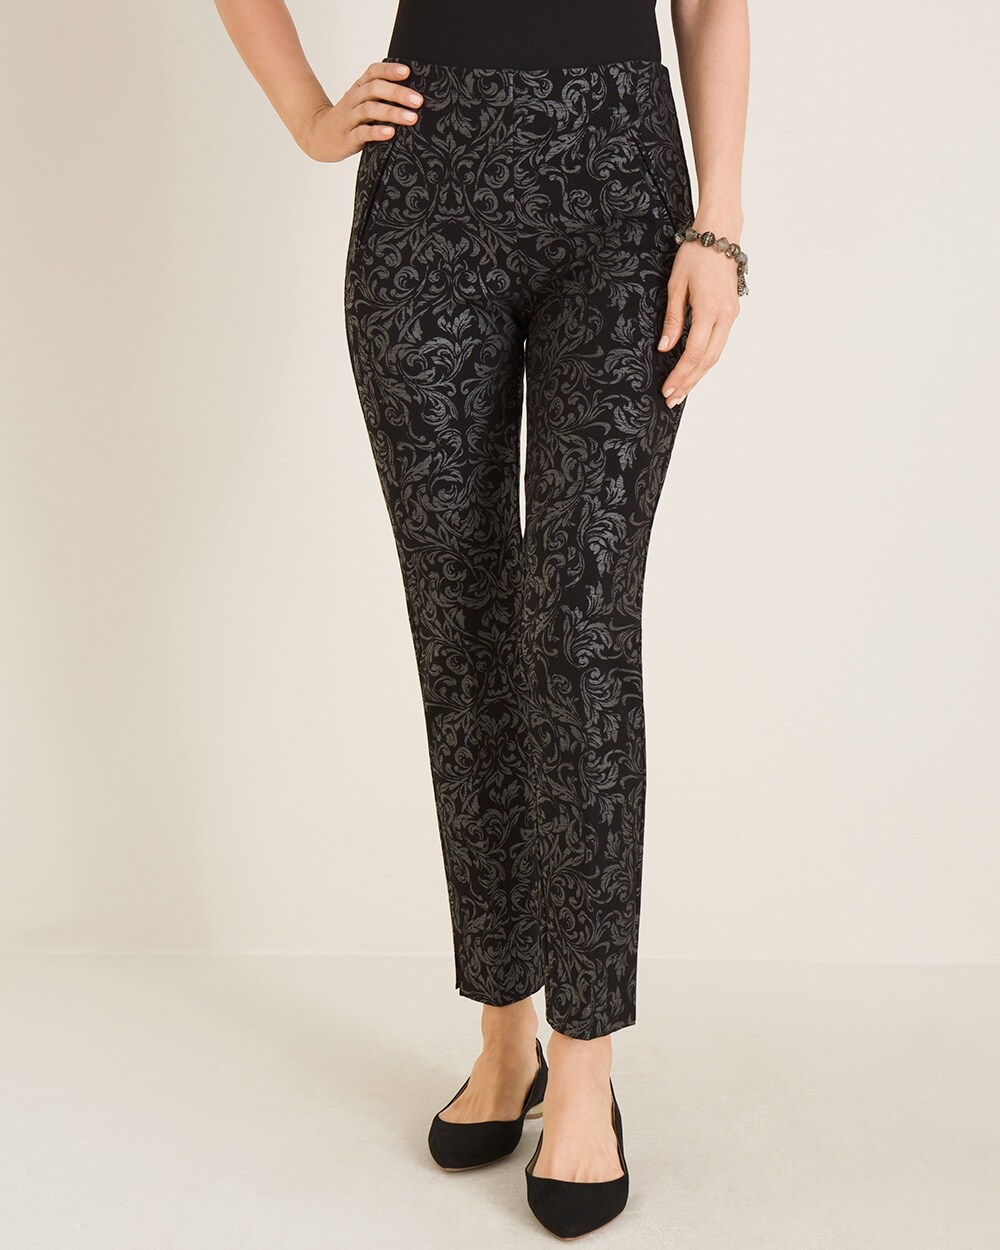 Juliet Scroll-Print Ankle Pants - Chico's